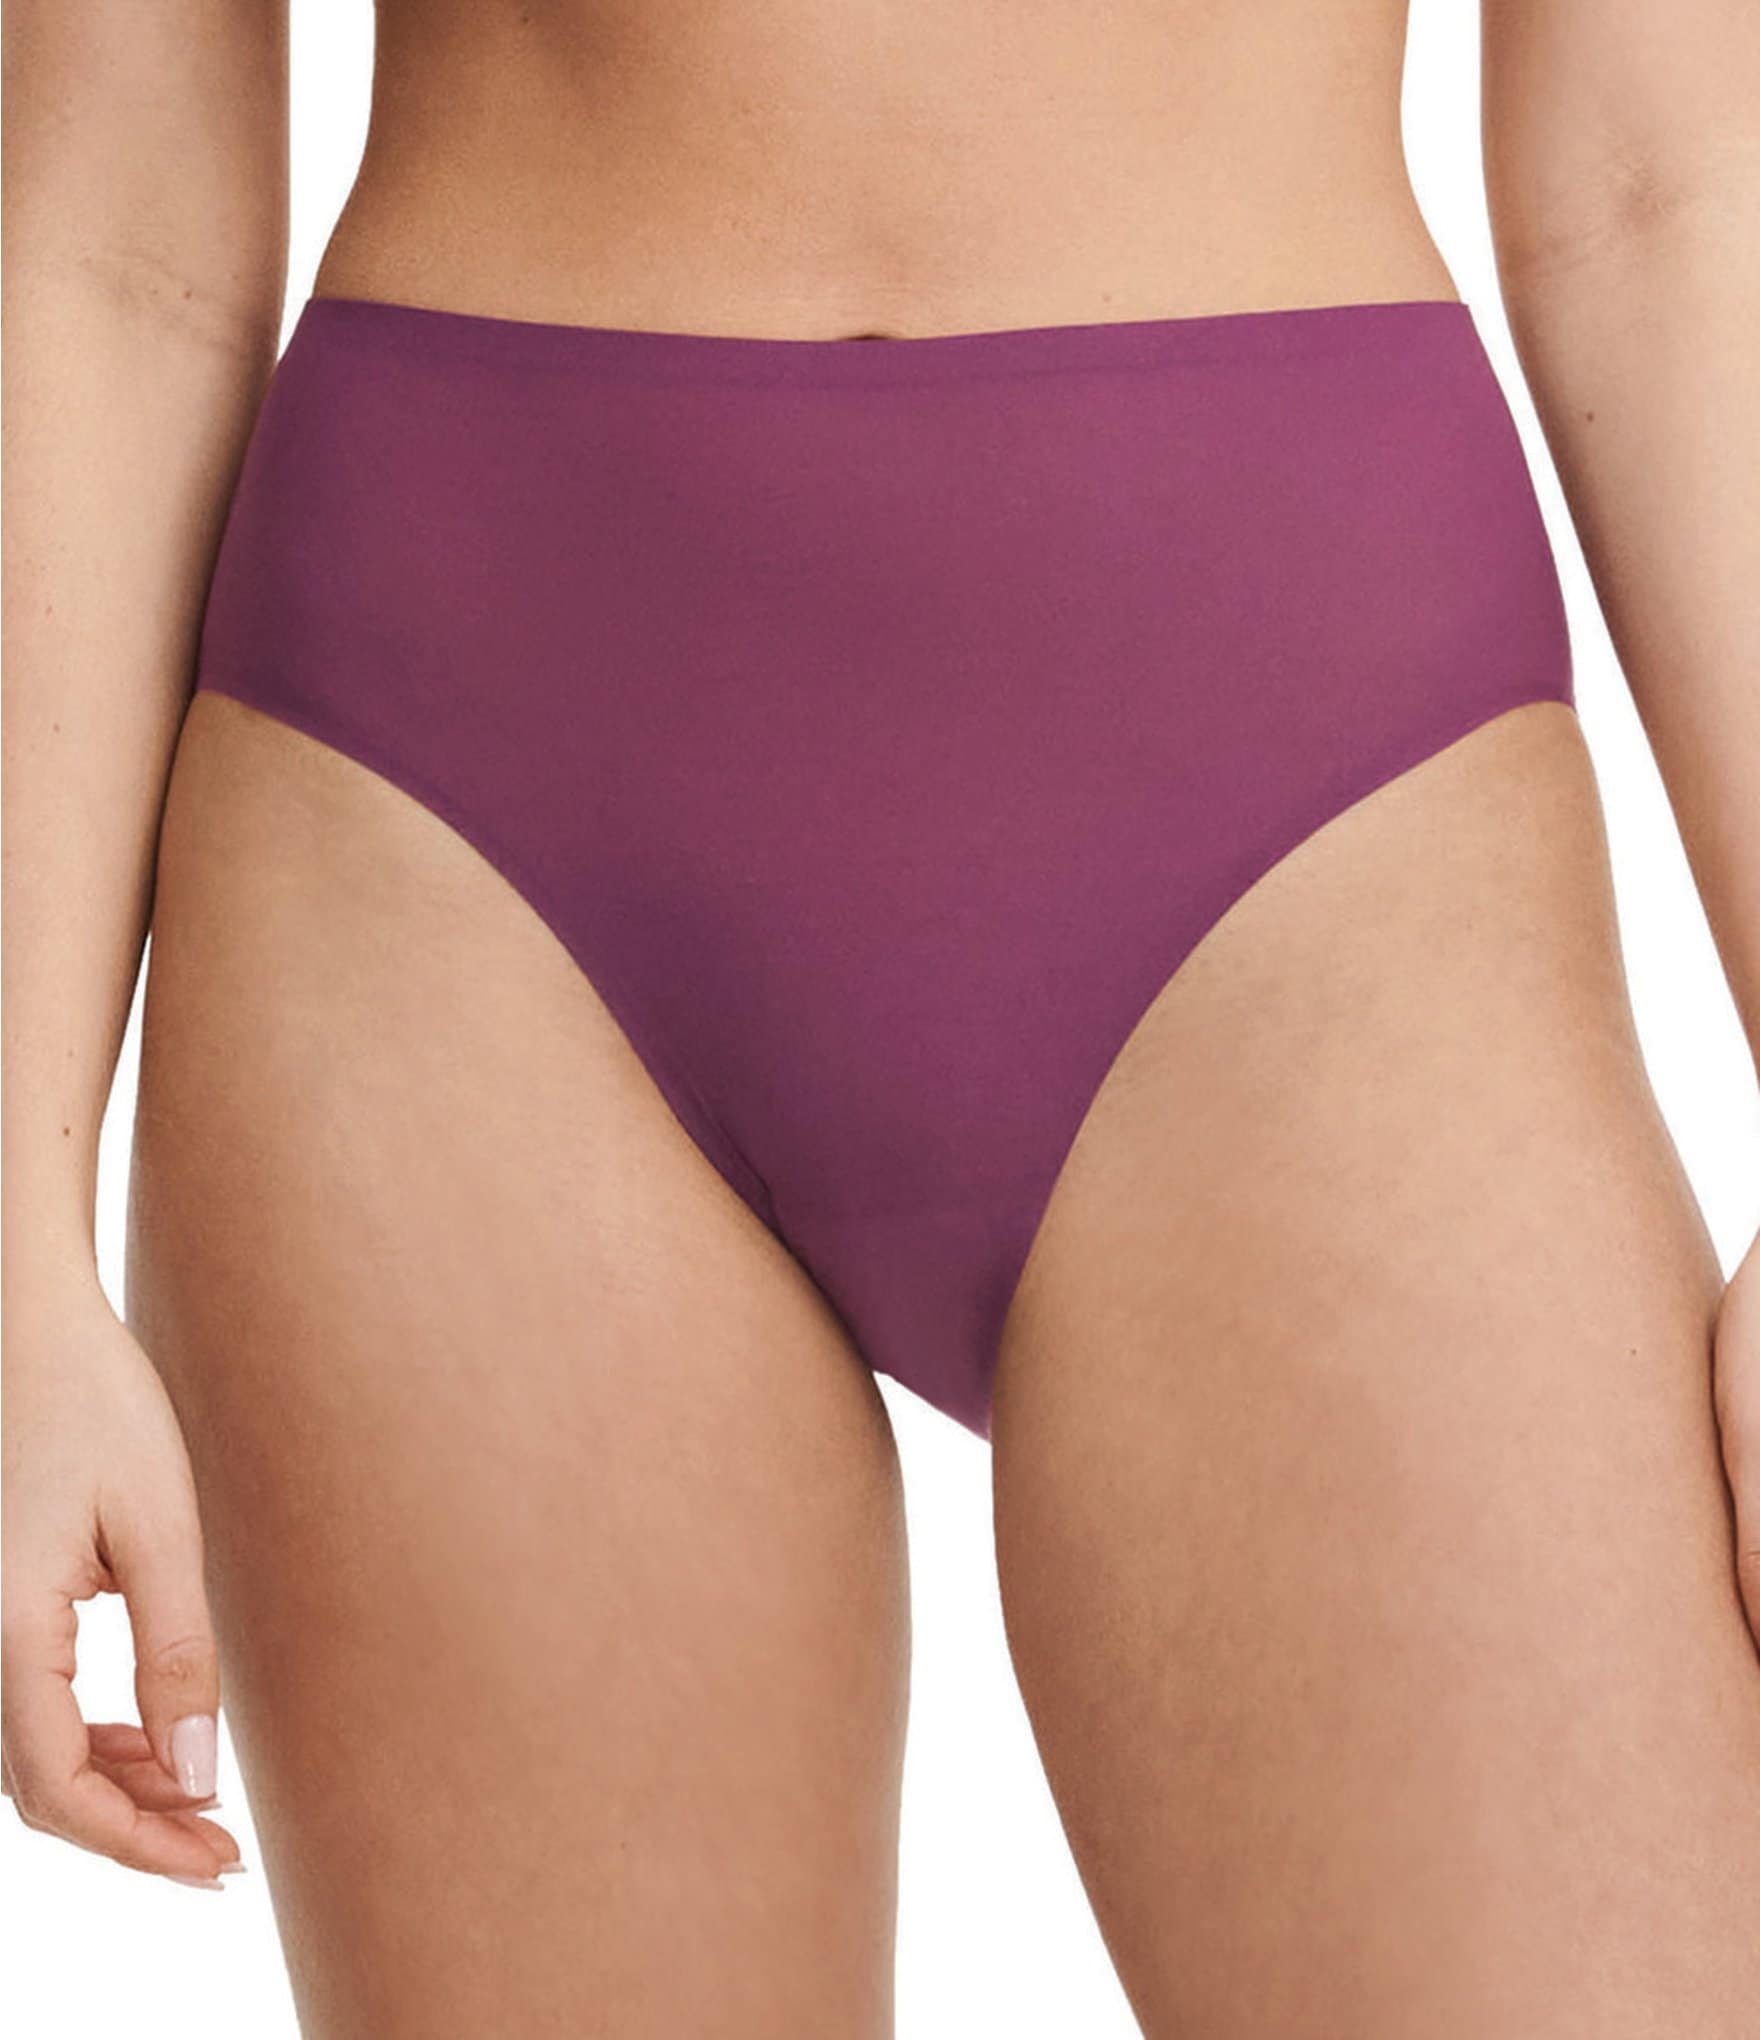 Seamless and Smooth: amanté Silicon Floss Panty